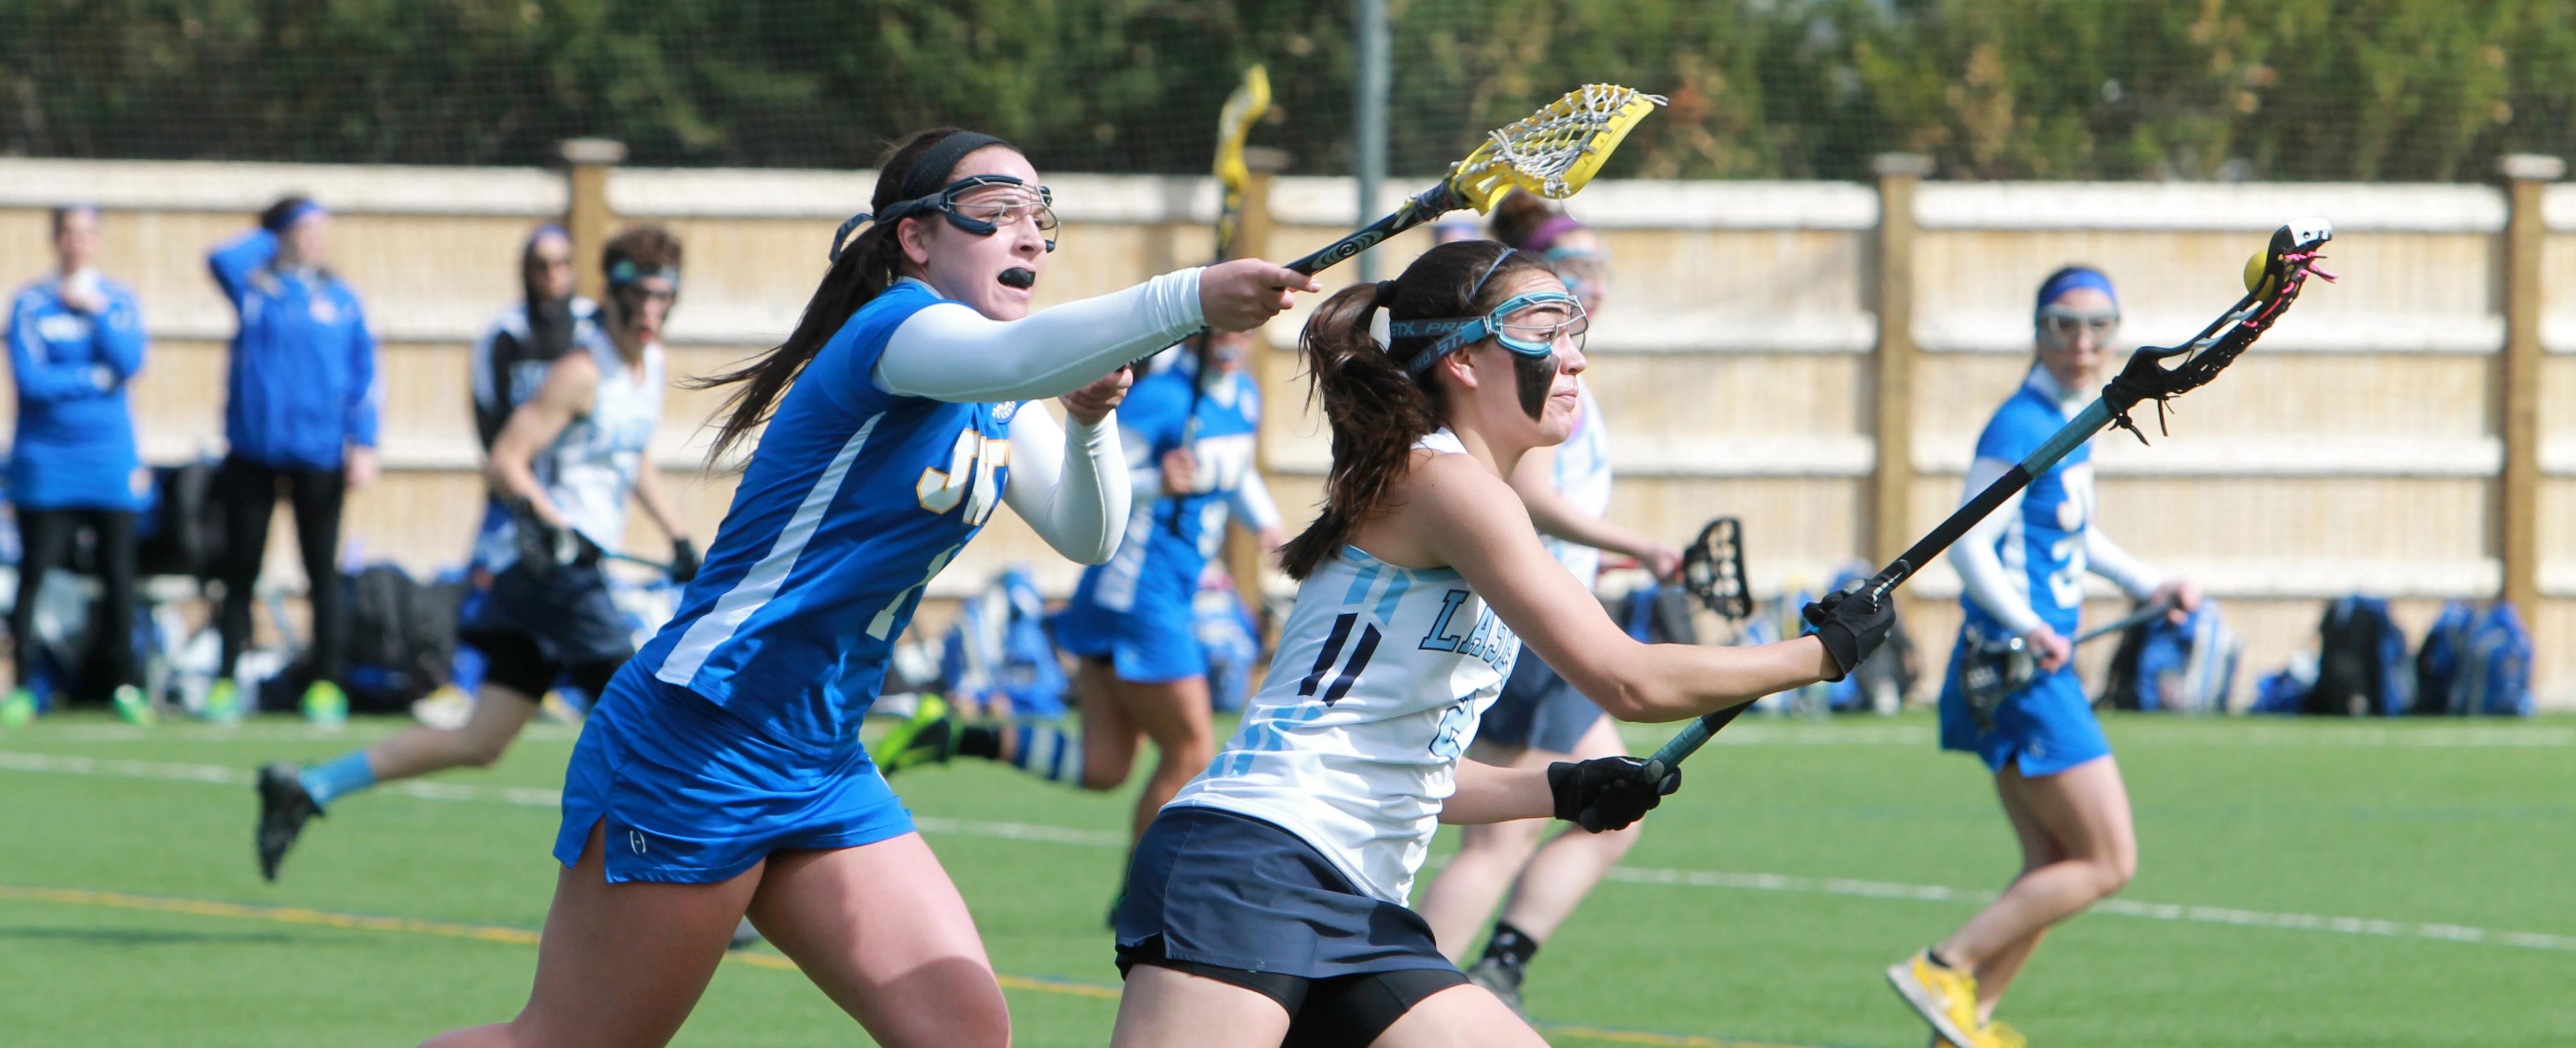 Women's Lacrosse Can't Come Back Against Monks; Fall Short 12-11